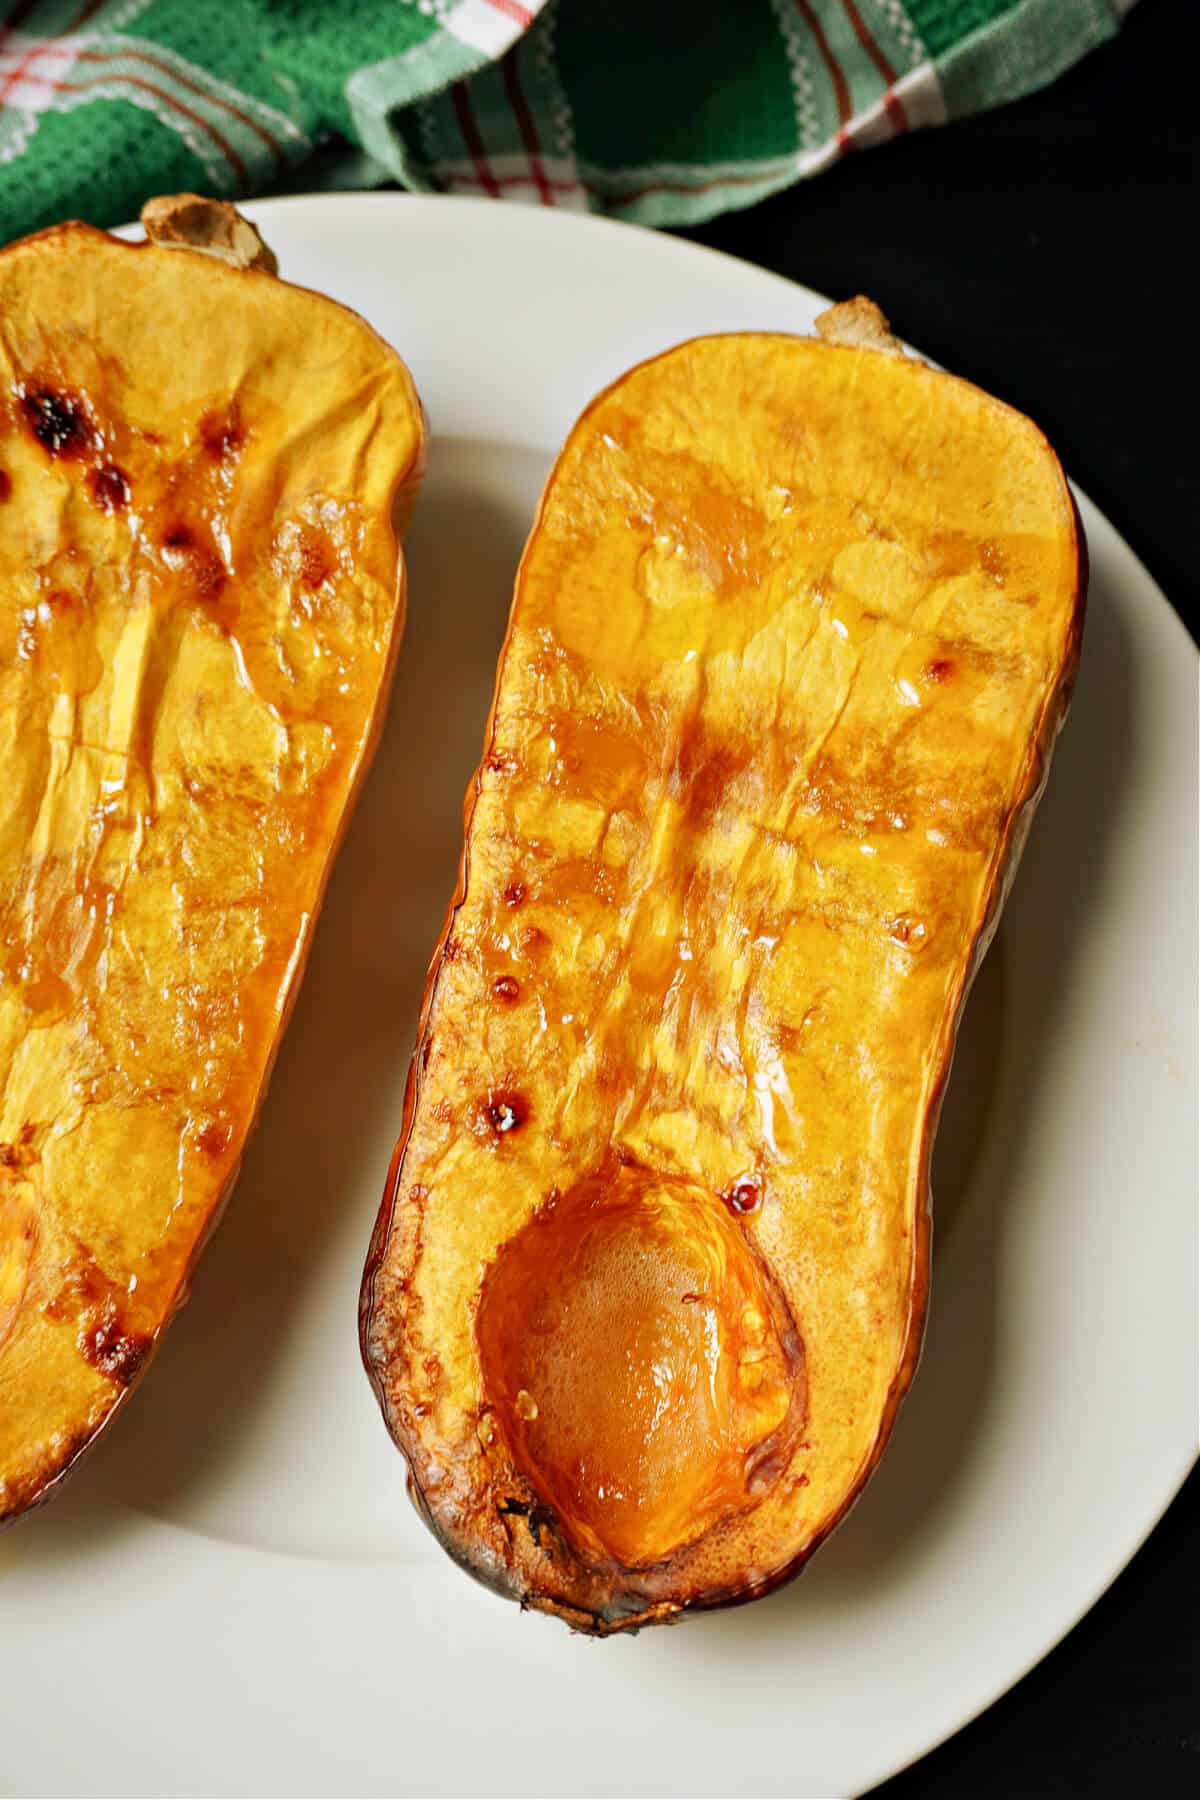 2 roasted butternut squash halves on a plate.